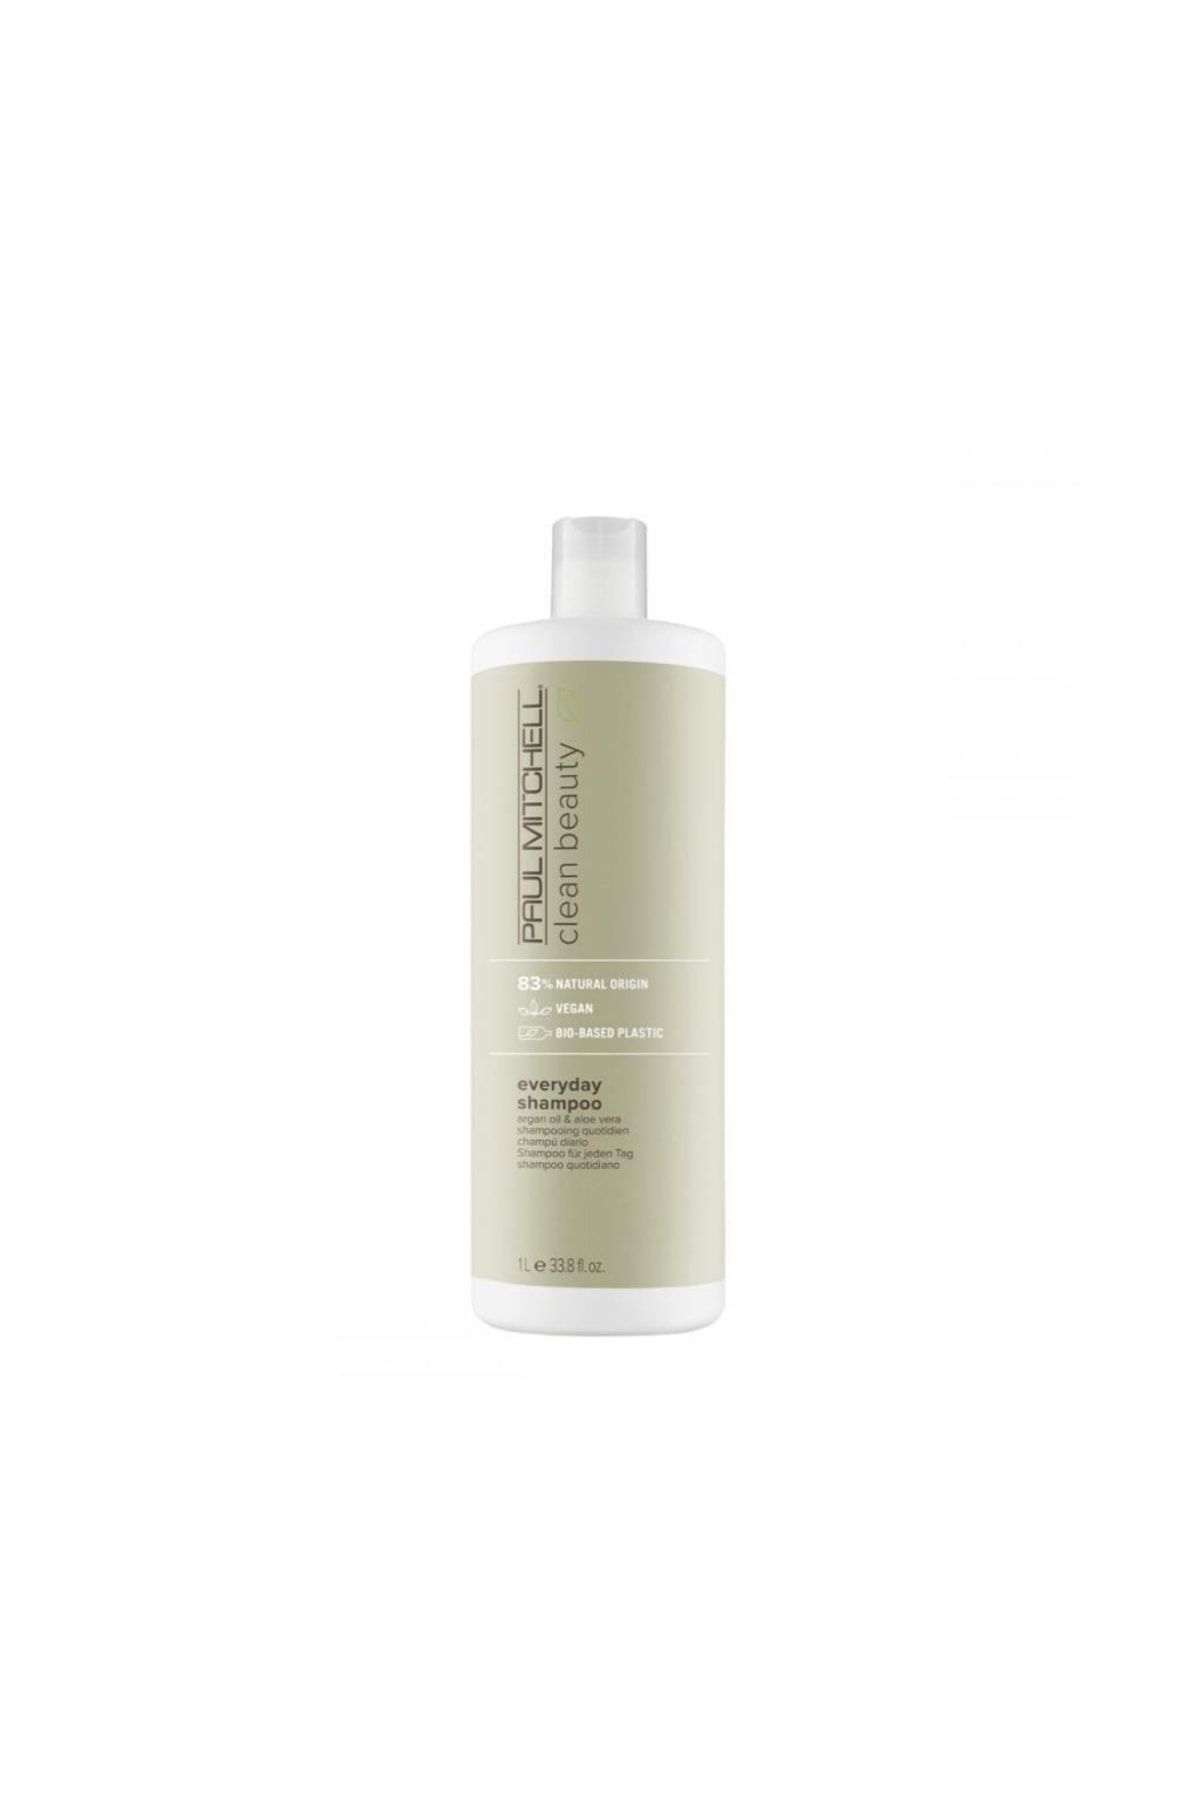 PAUL MITCHELL Pm Clean Beauty Everyday Şampuan 1000 ml